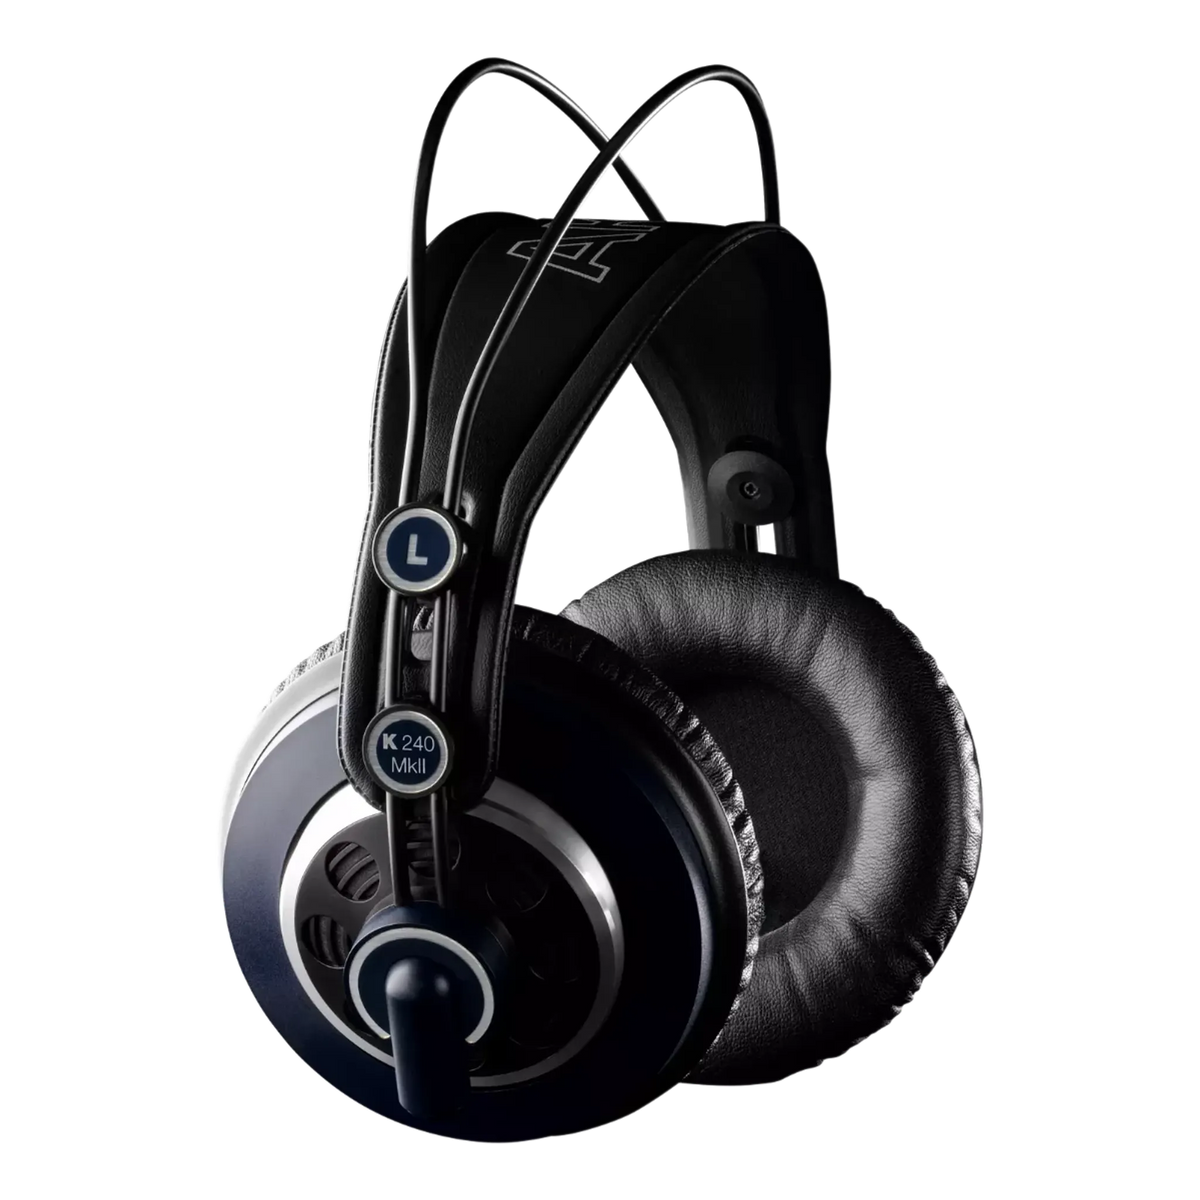 The AKG K240 MKII professional over-ear, semi-open headphones carry on the success of their predecessor—the AKG K240 Studio—and are a standard in studios, orchestras and on stages around the world.